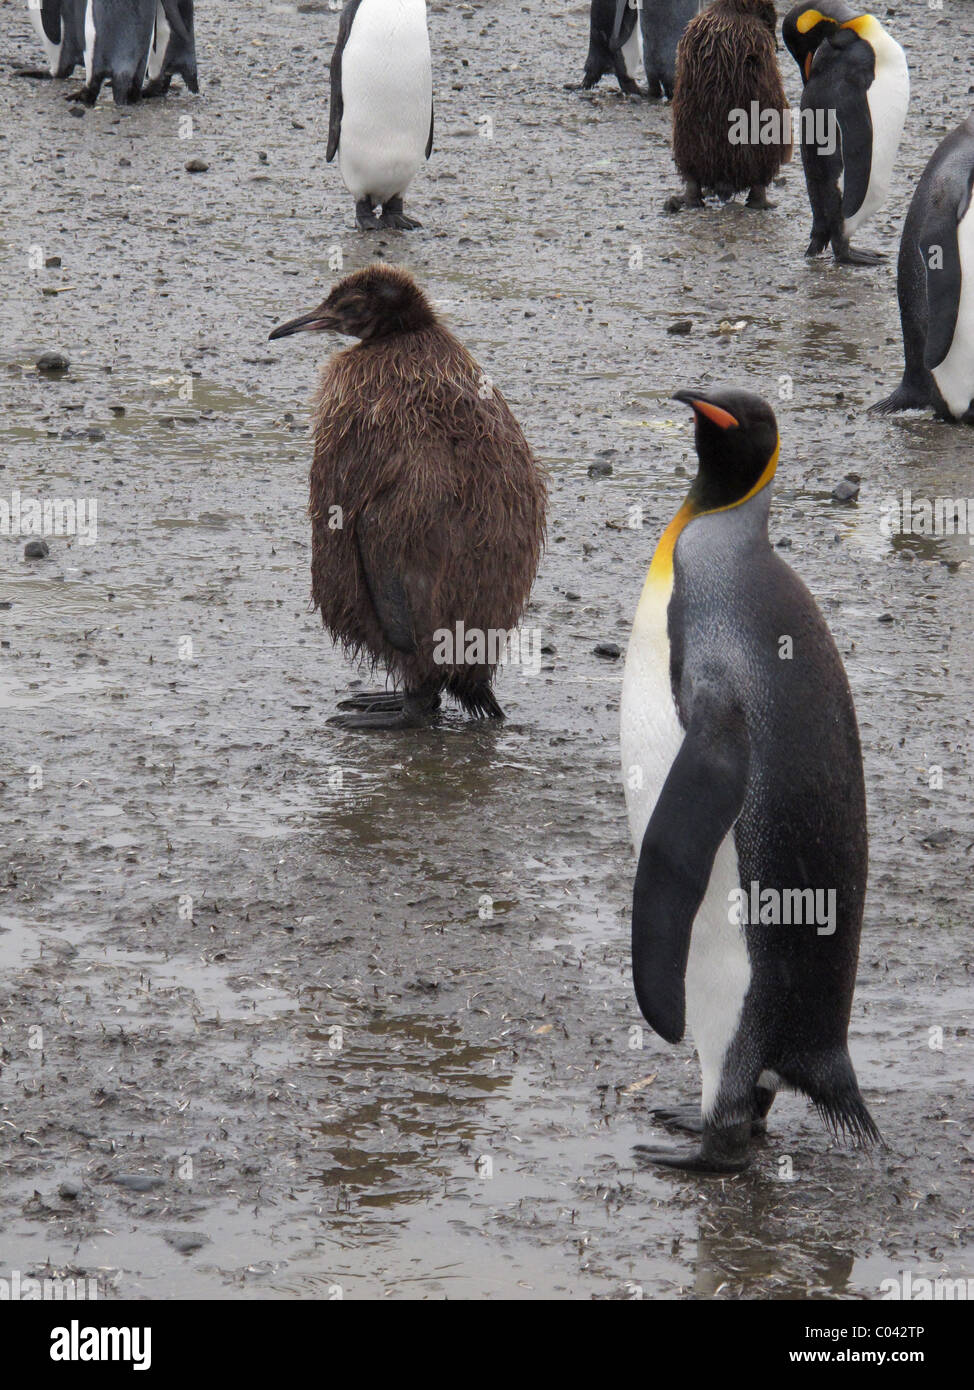 Chicks of King Penguings, suffering under the wet, rainy conditions, Salisbury Plain, South Georgia Stock Photo